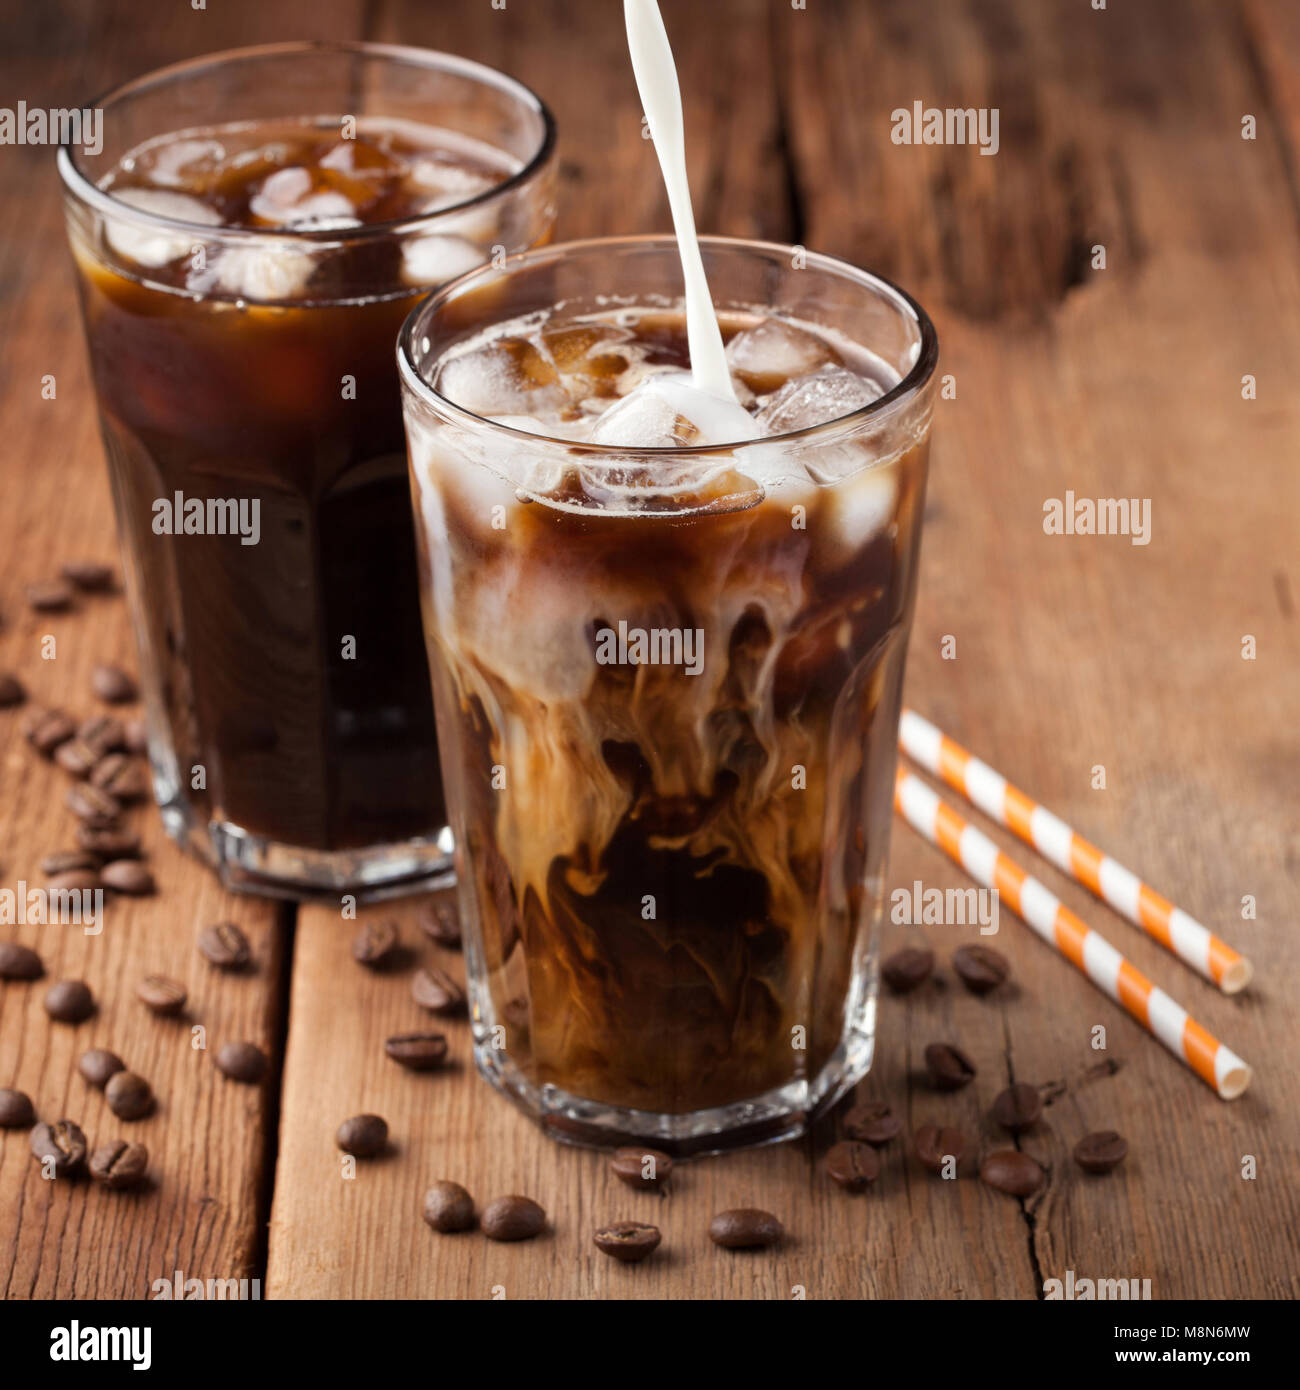 https://c8.alamy.com/comp/M8N6MW/ice-coffee-in-a-tall-glass-with-cream-poured-over-and-coffee-beans-M8N6MW.jpg